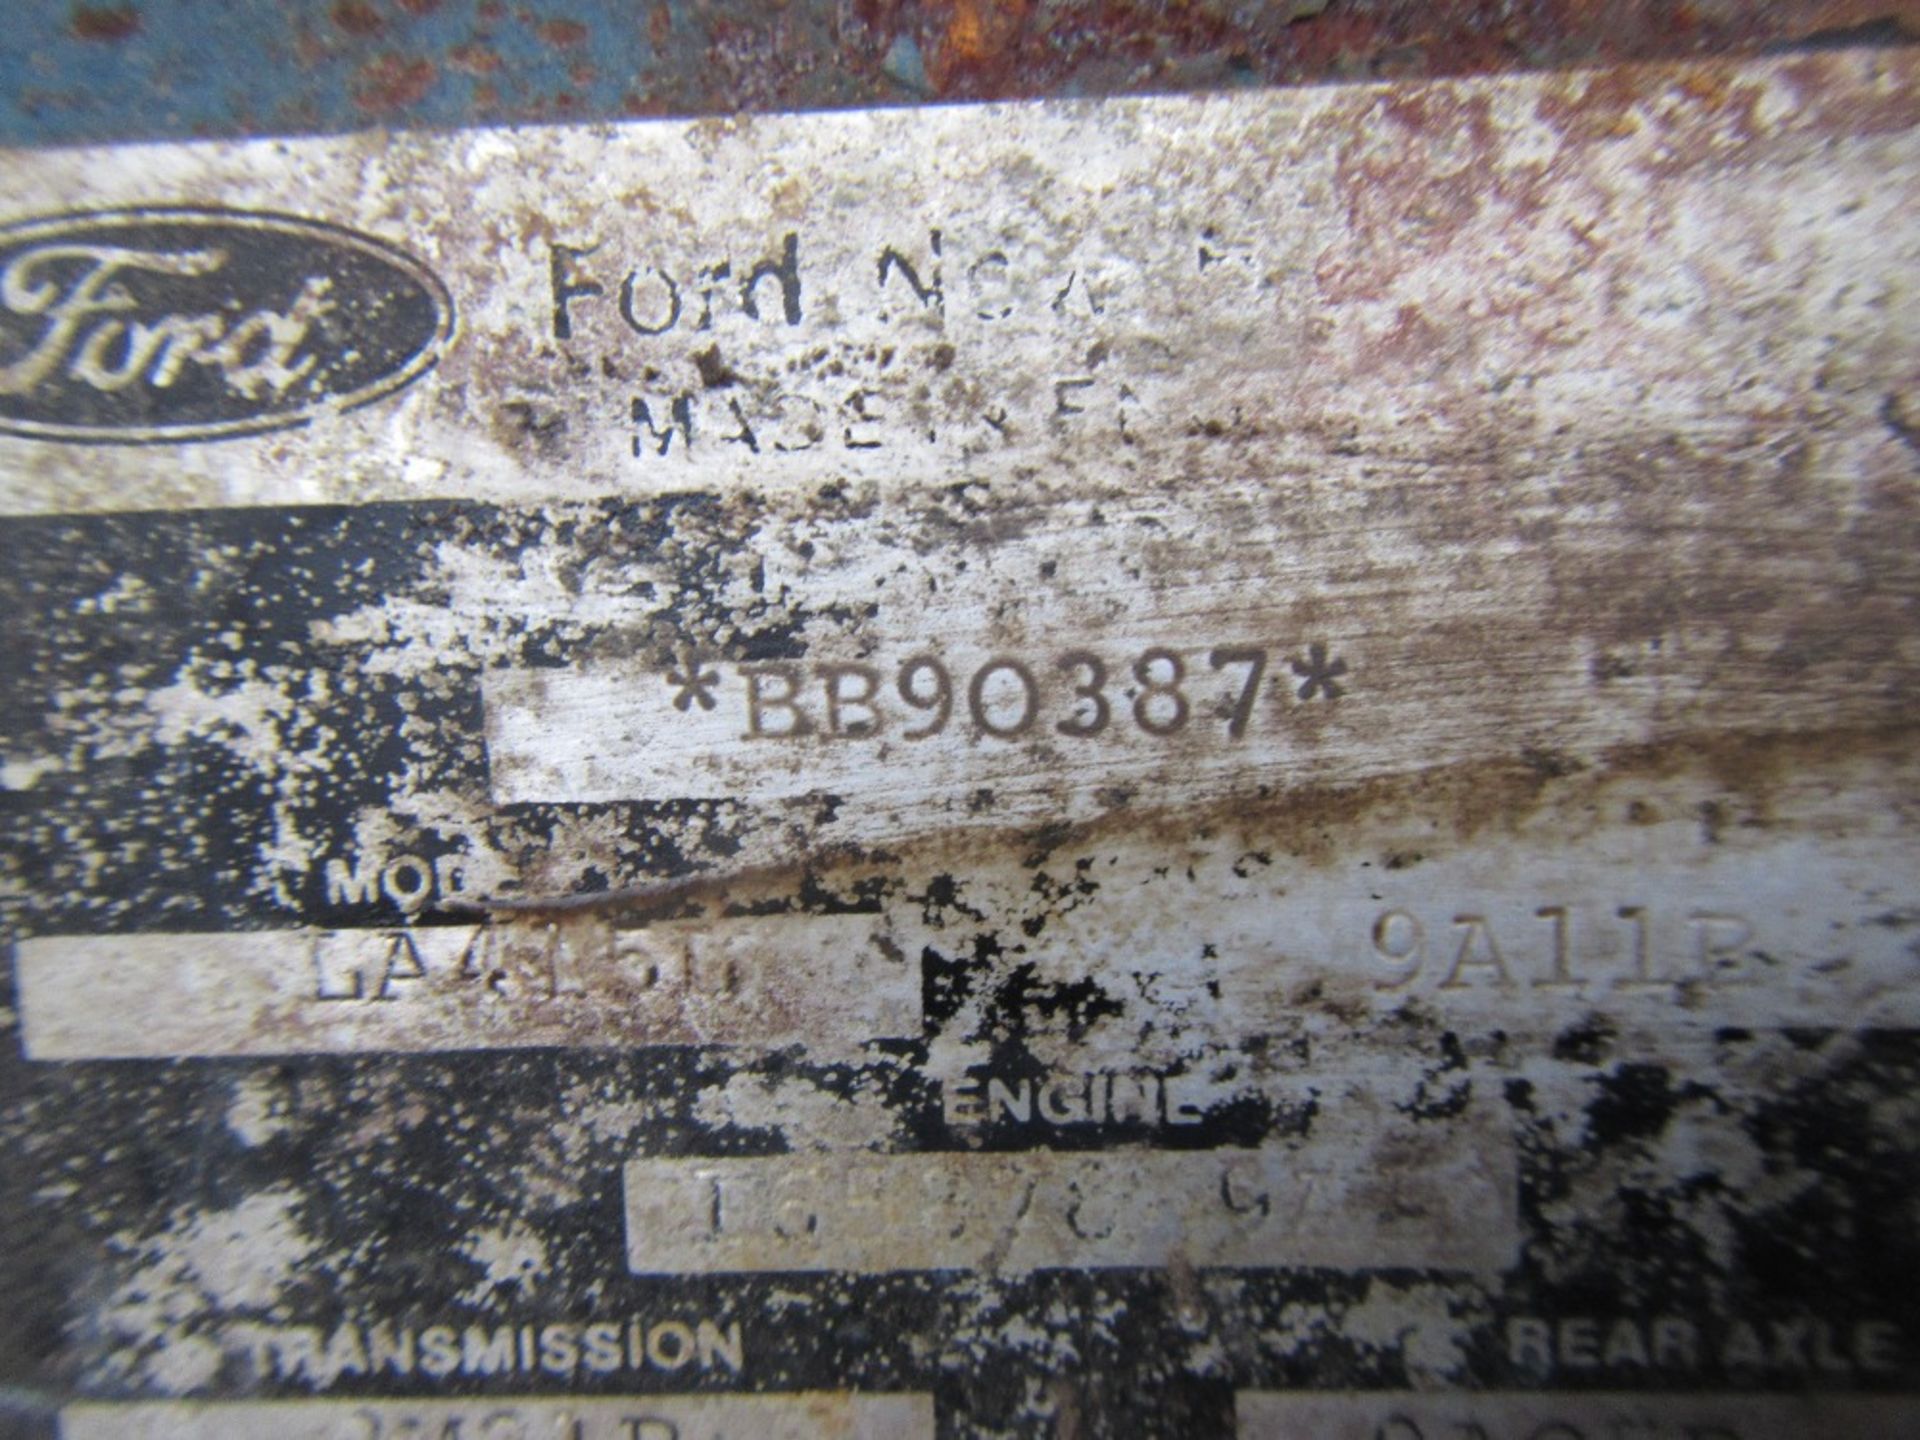 Ford 5610 4wd Tractor. 3200 Hrs Reg No F230 ETH Ser No BB90387 - Image 15 of 15